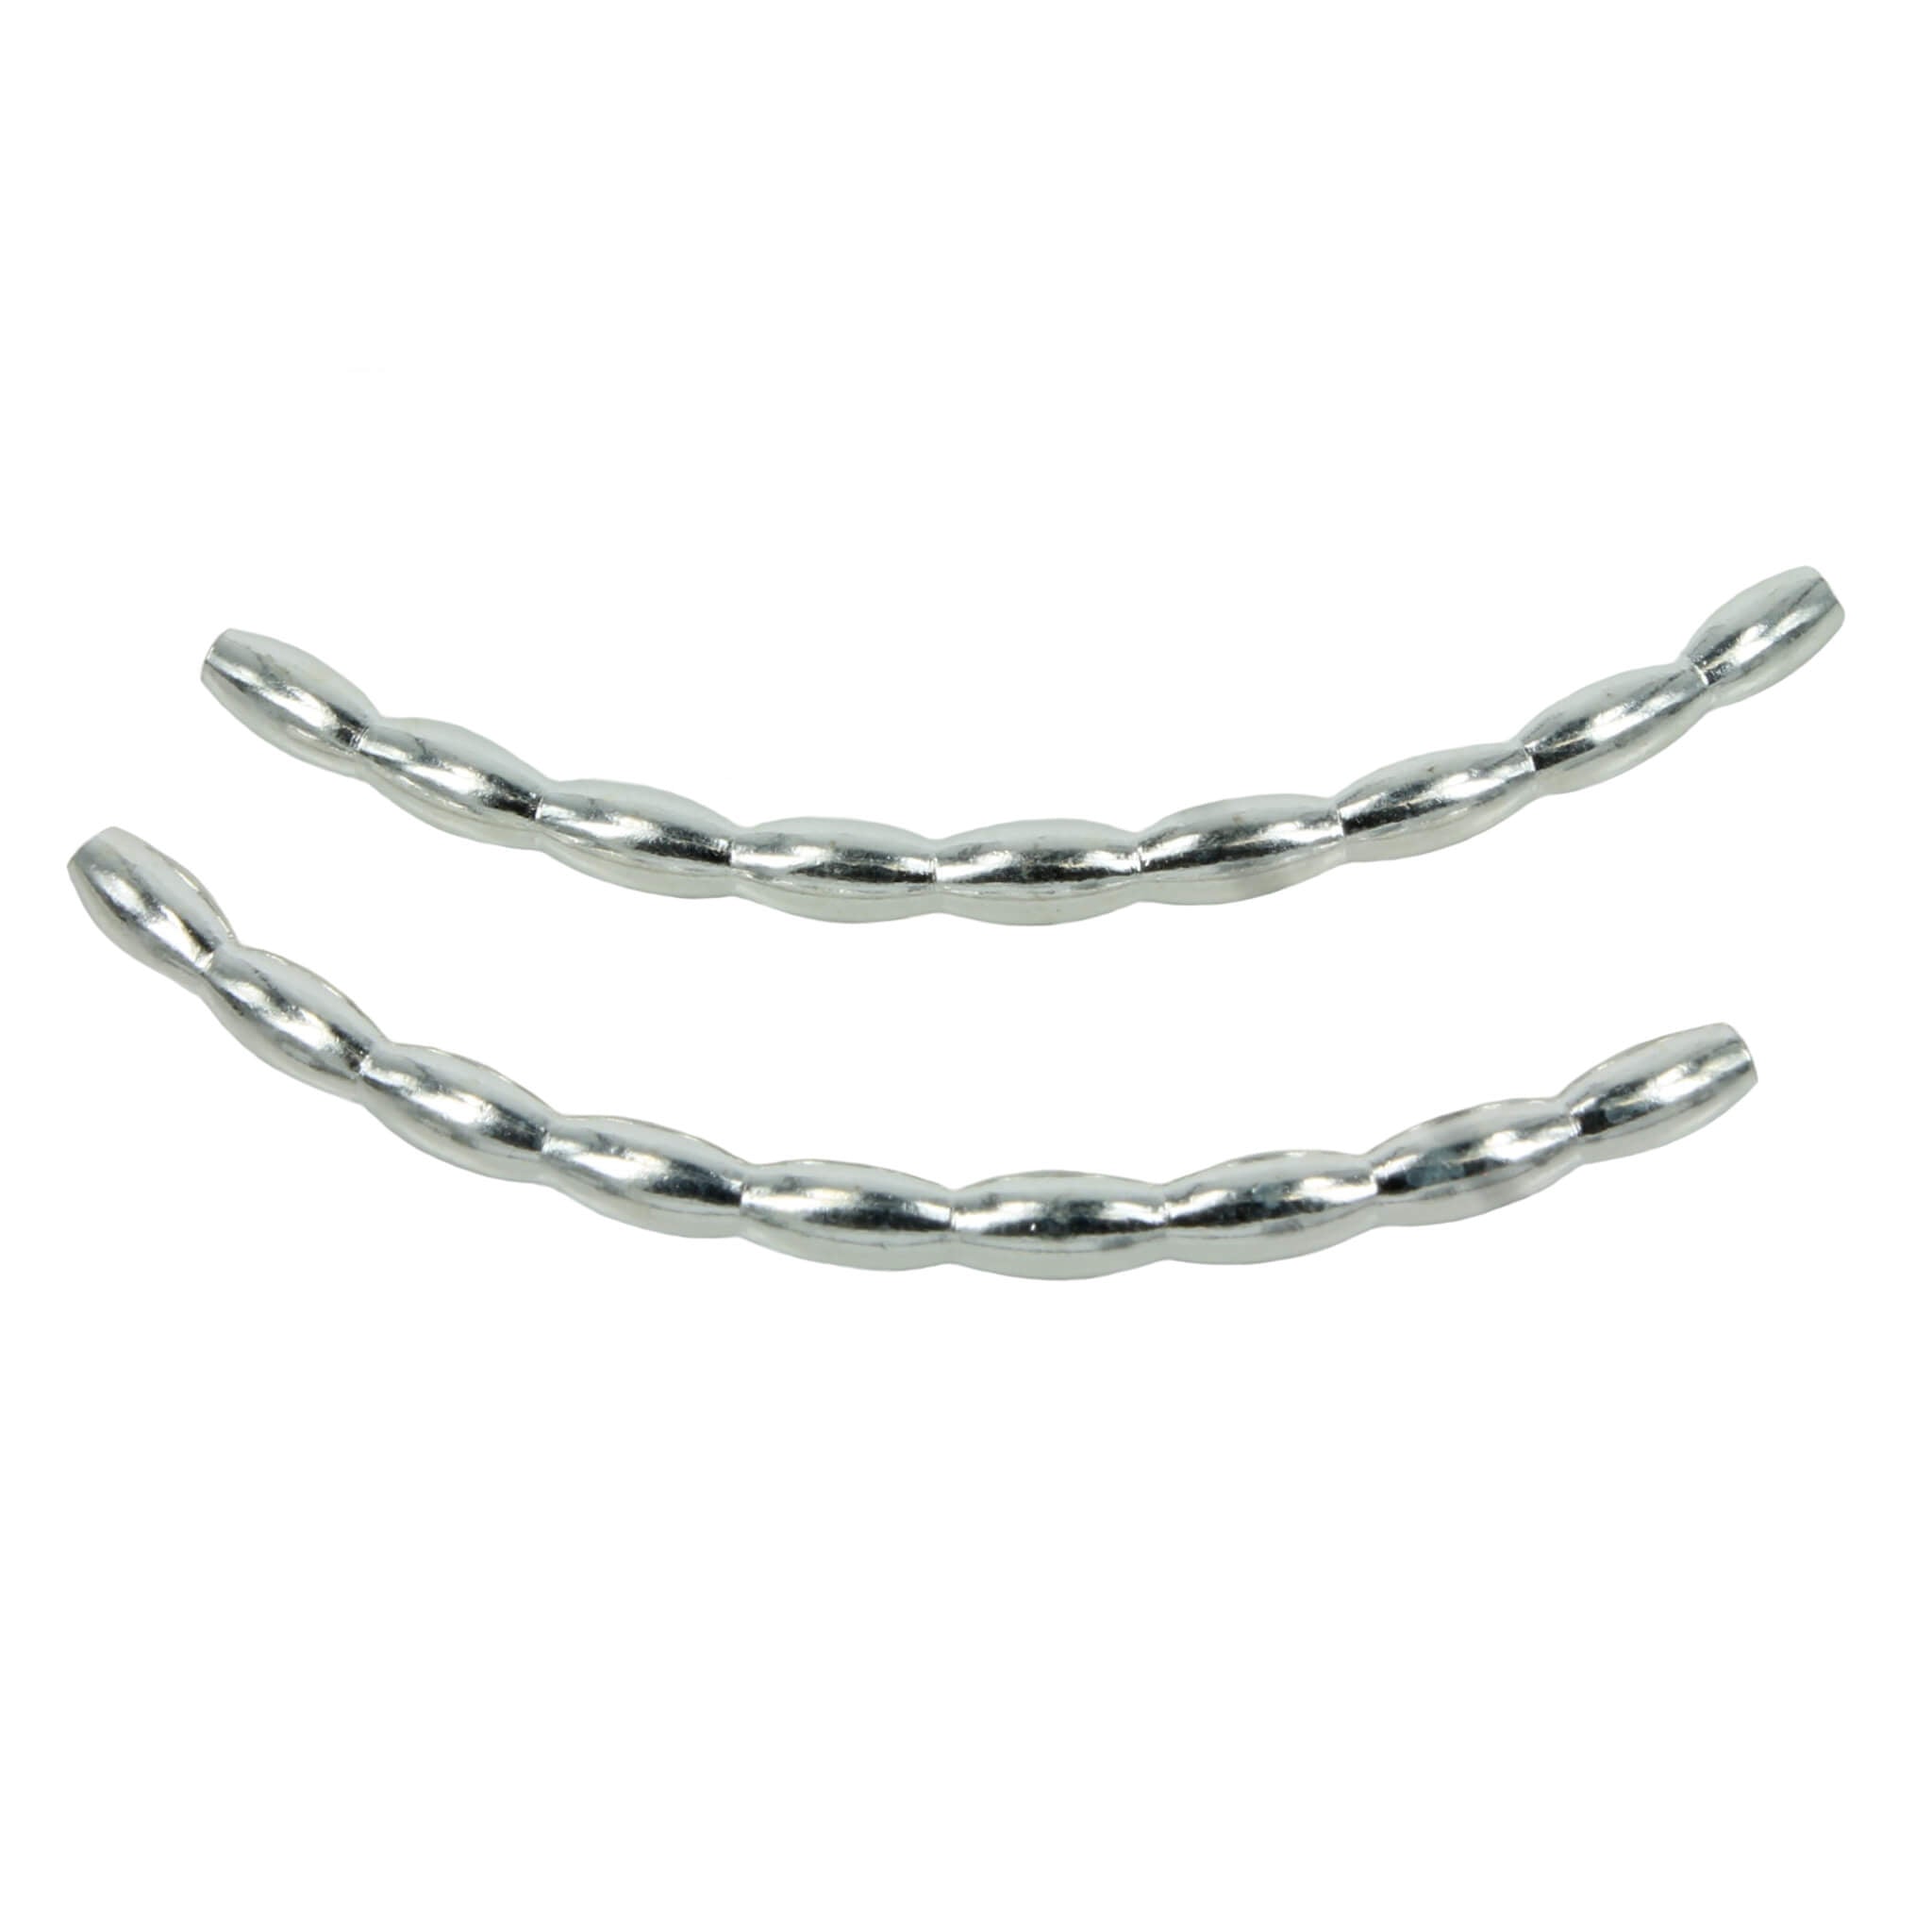 Curved Segmented Tube Bead in Sterling Silver 40x2.5mm